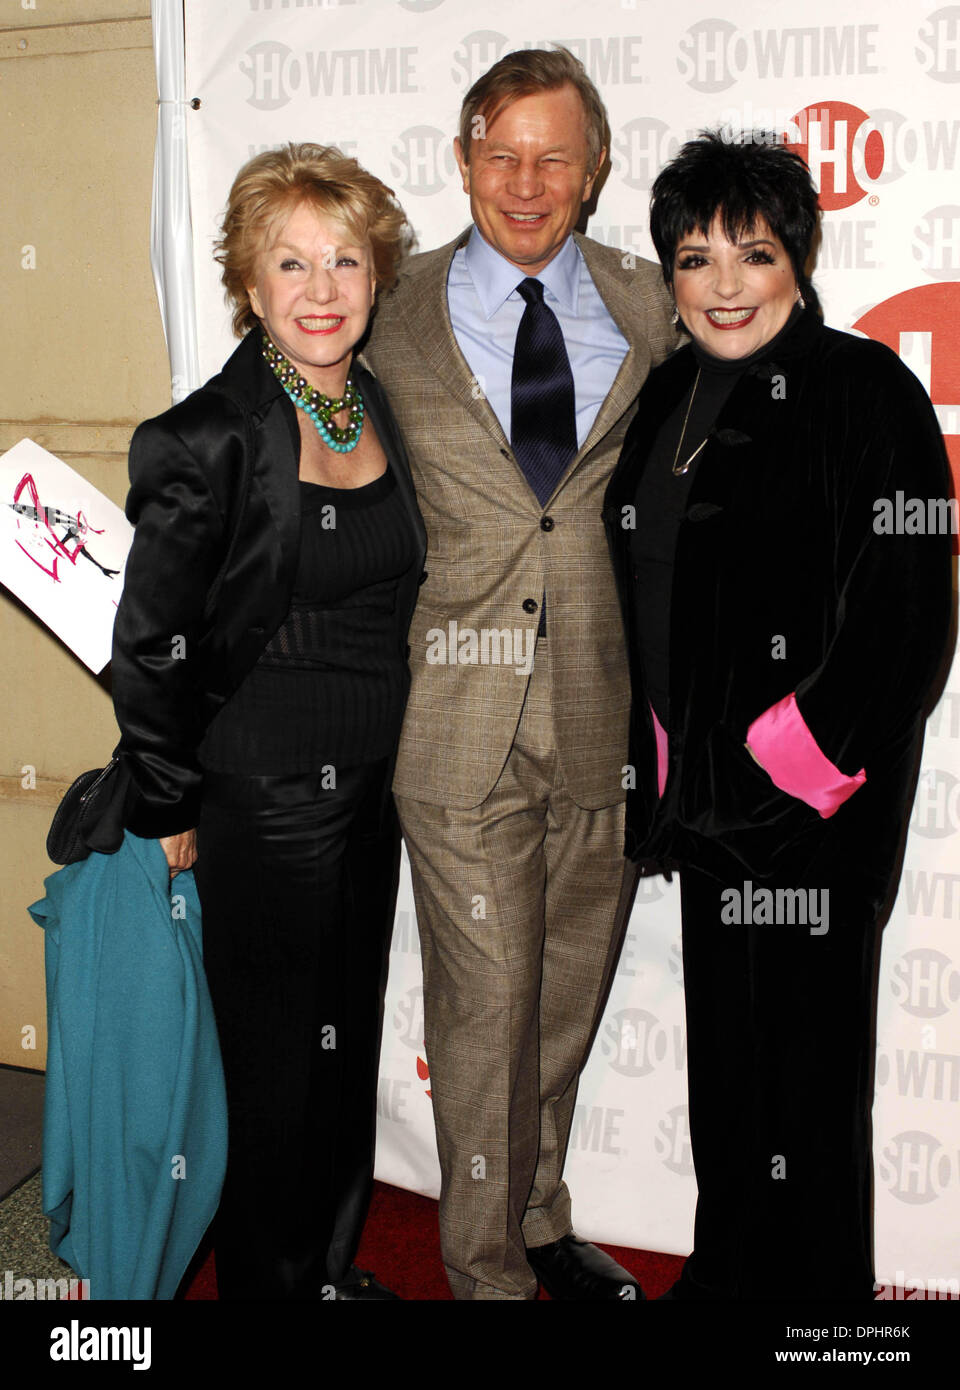 Mar. 21, 2006 - Hollywood, California, U.S. - LOS ANGELES CA MARCH 21, 2006 (SSI) - -.Patricia McCallum, her husband, actor Michael York and actress Liza Minnelli pose for photographers, during the premiere of the restored and re-mastered 1972 Bob Fosse TV concert event LIZA WITH A Z, held at the MGM Screening Room, on March 21, 2006, in Century City, Los Angeles.   / Super Star Im Stock Photo